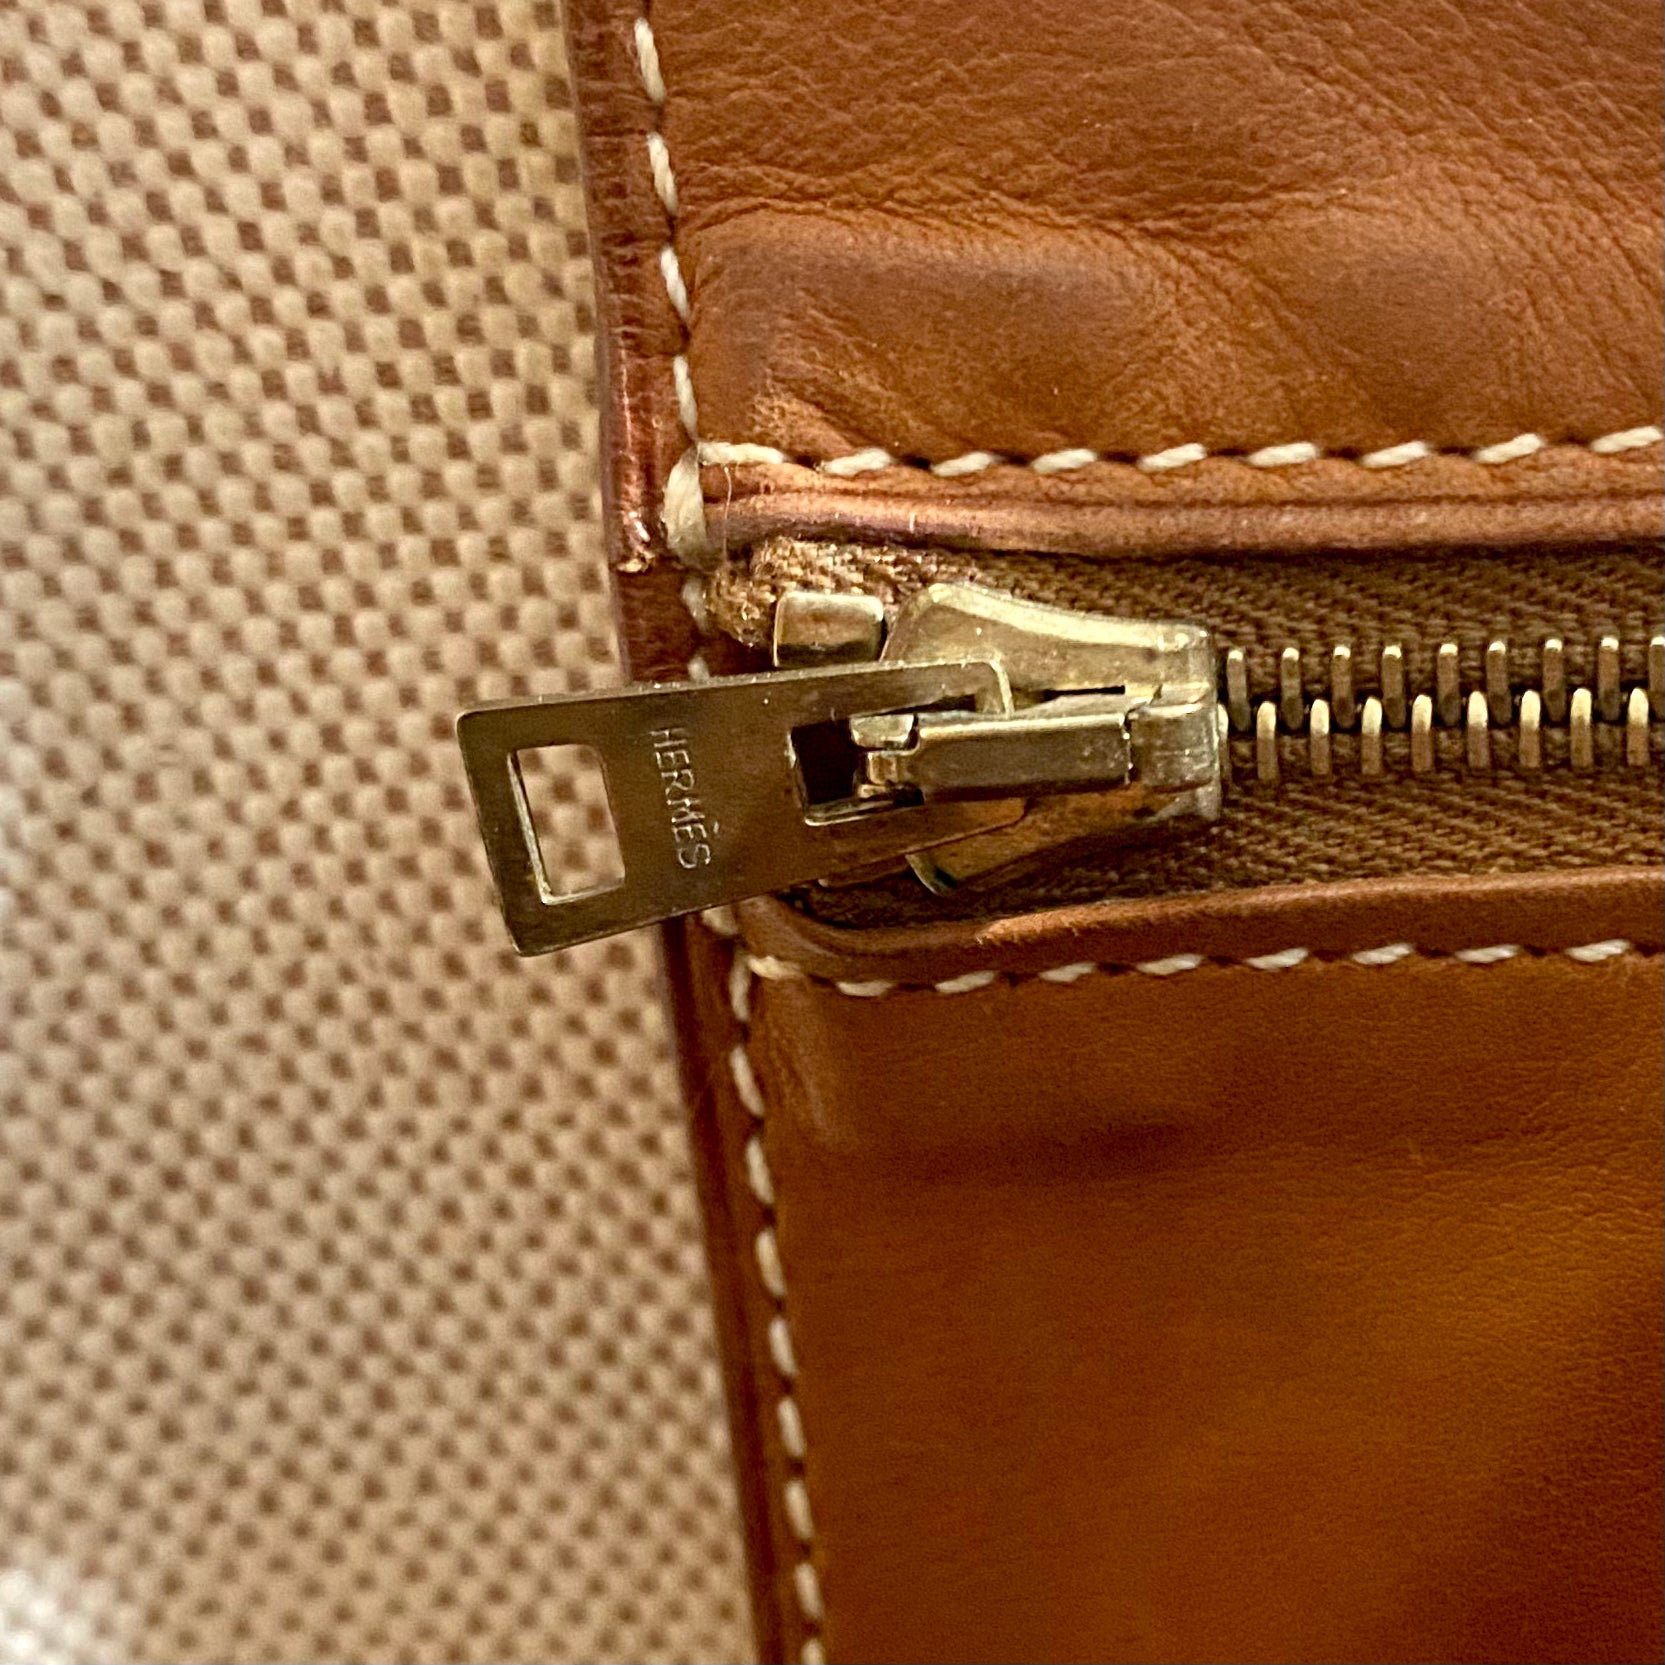 Hermes Canvas Tsako Bag – Dina C's Fab and Funky Consignment Boutique